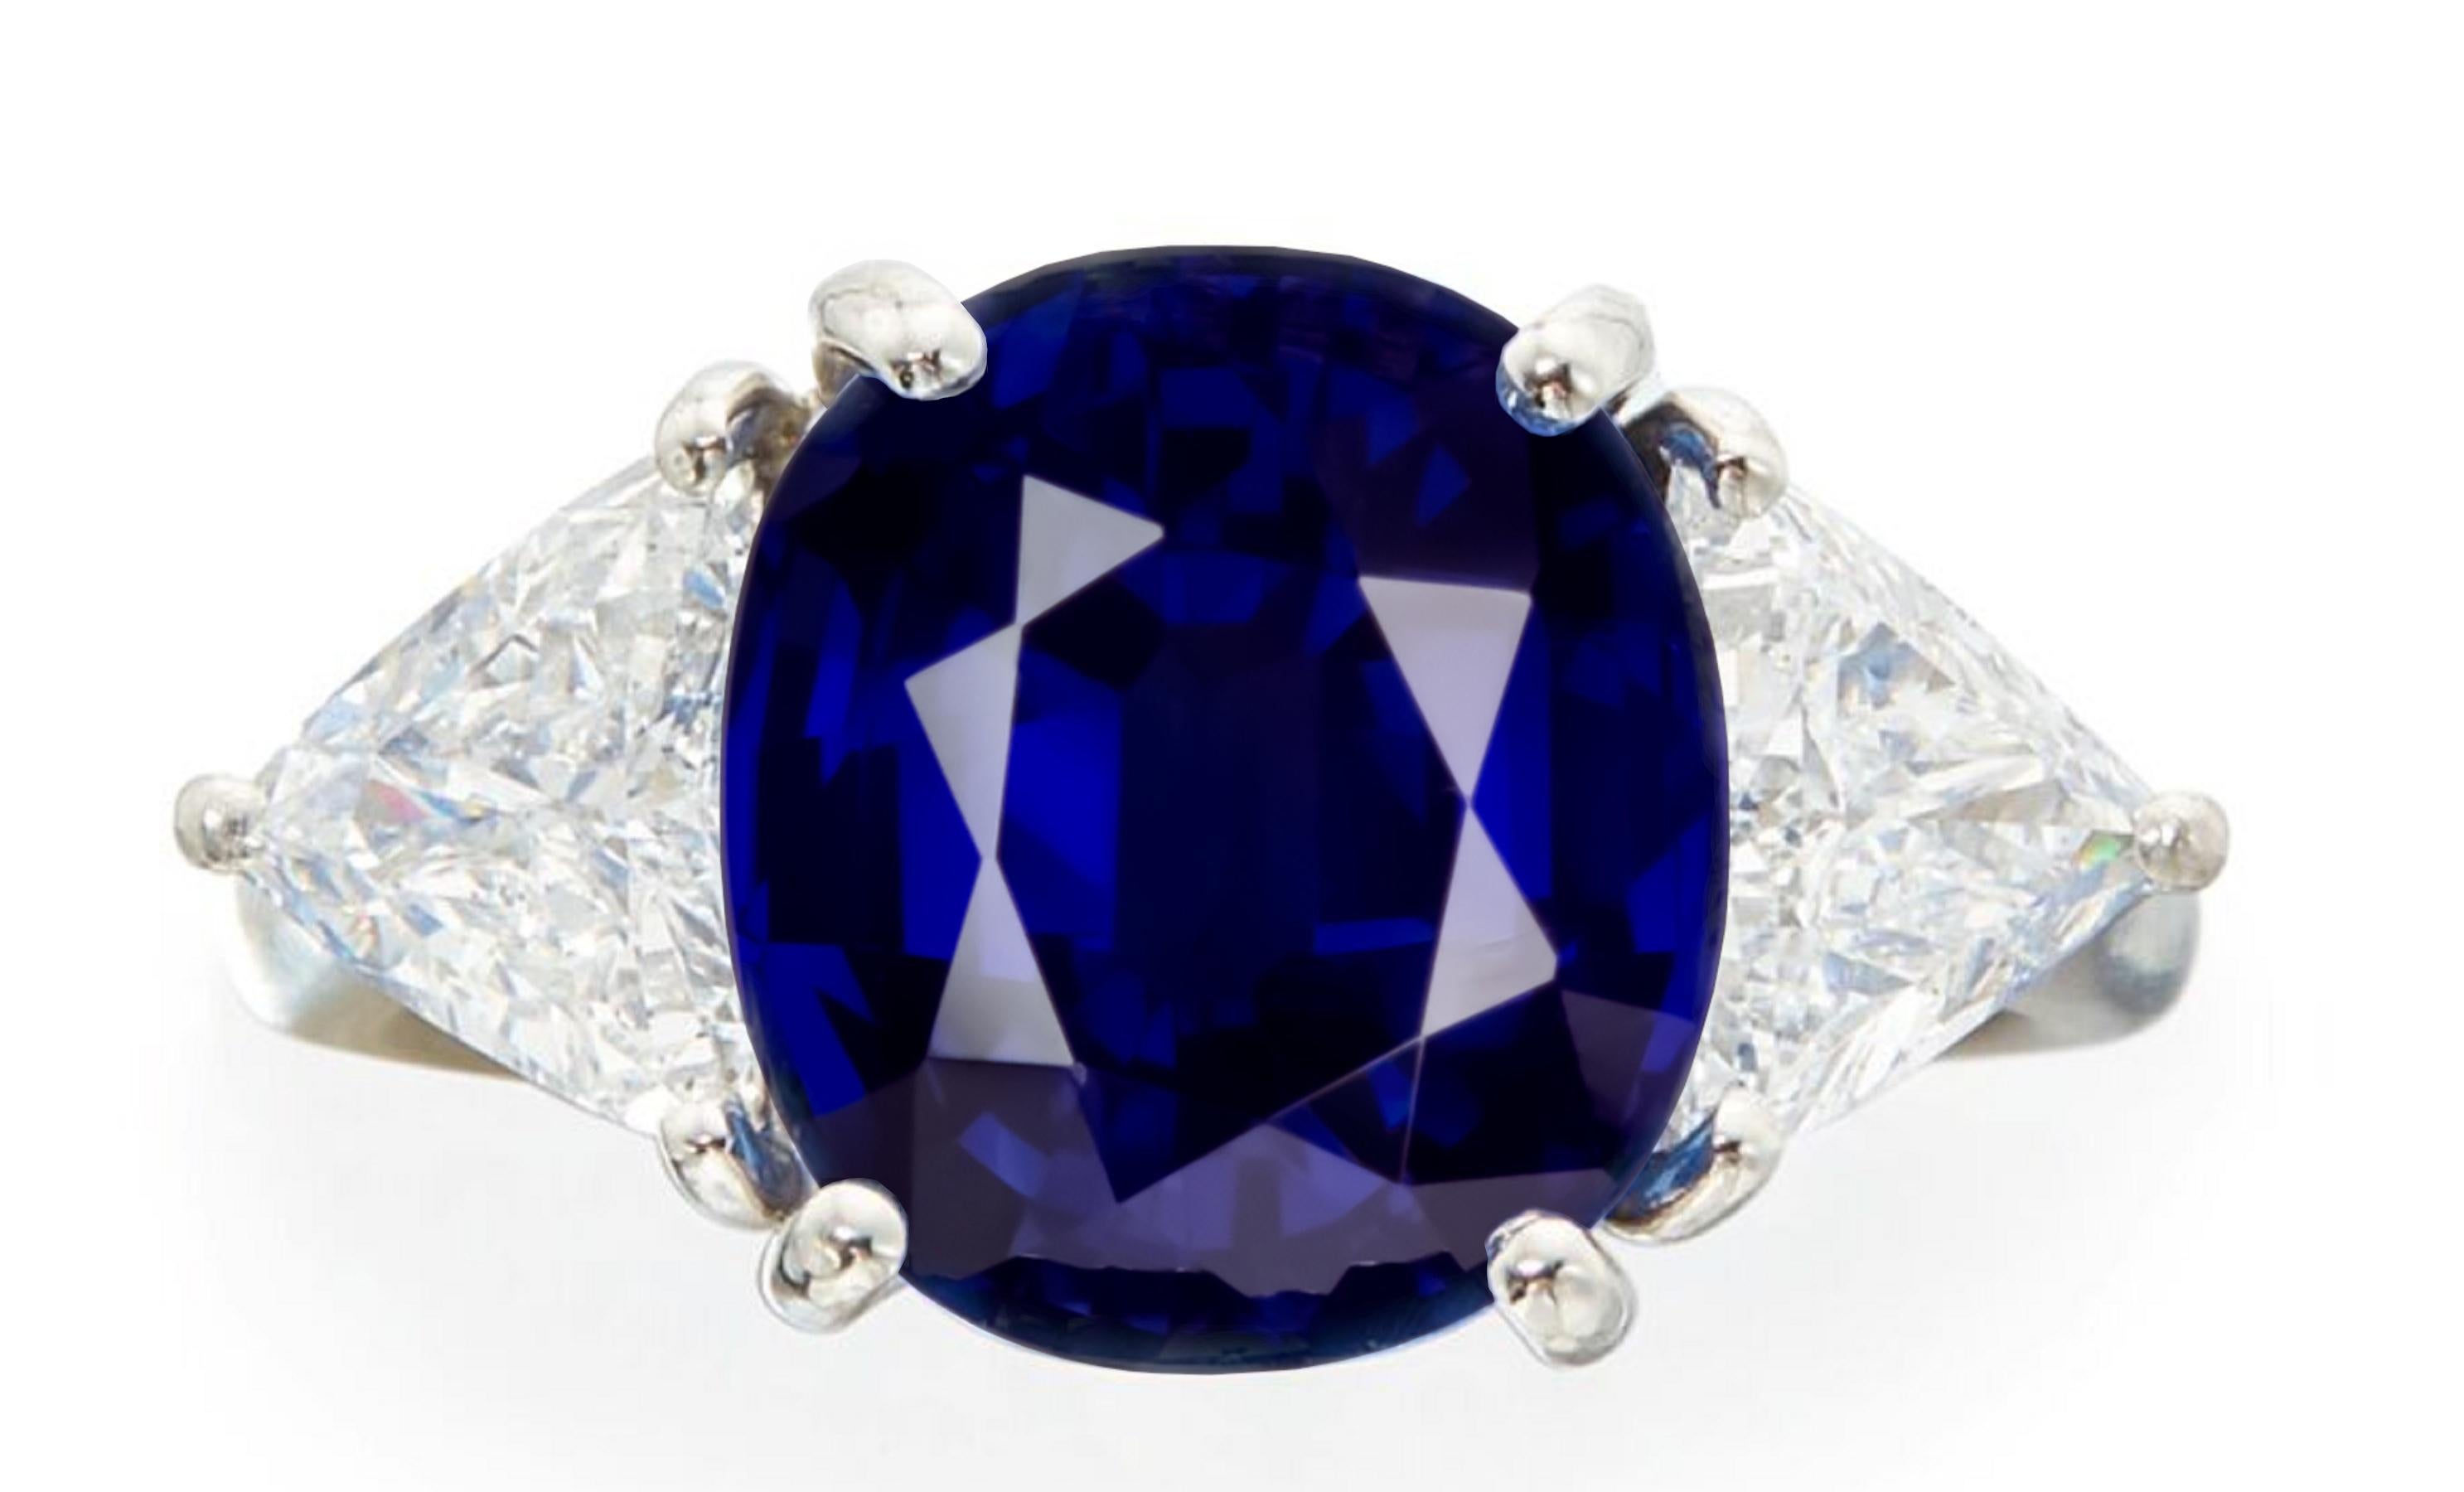 Gorgeous cushion cut GRS certified sapphire is a gorgeous vivid blue color. It is a richly saturated and perfectly even deep blue color. 

The play of light in this sizeable 2.70 carat  sapphire creates a mesmerizing range of blue tones that radiate